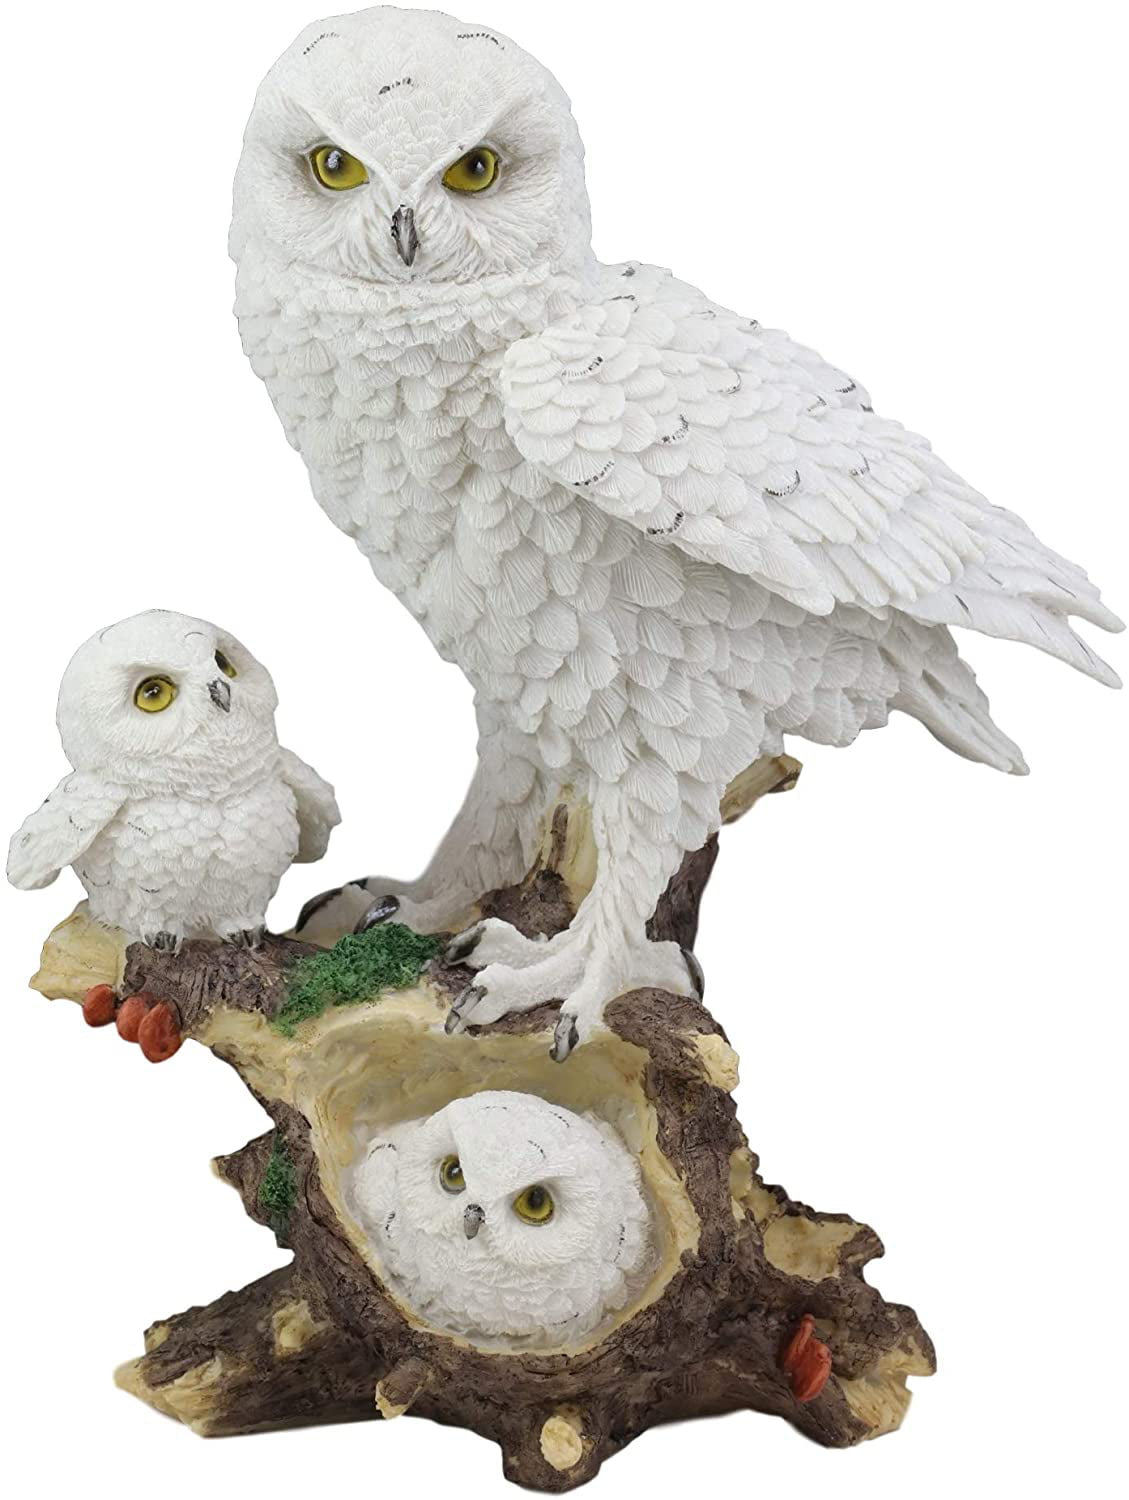 Large 31 cm White Snowy Owl Welcome Figurine Ornament. 